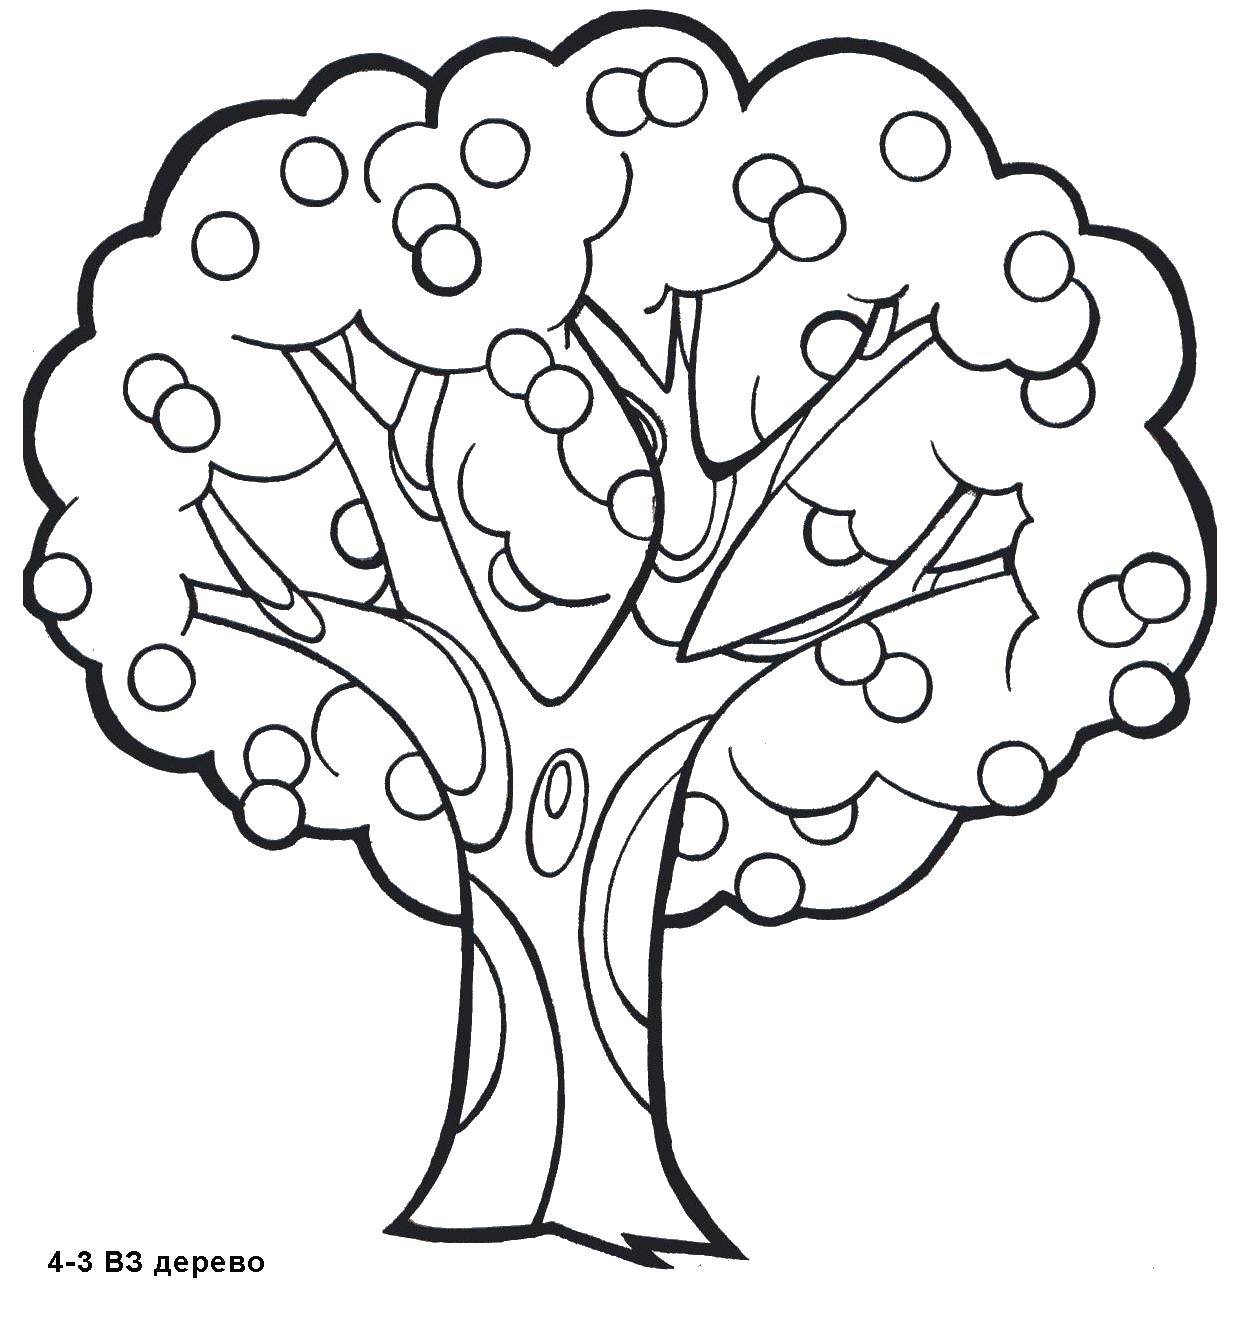 Coloring Tree with fruit. Category tree. Tags:  tree.